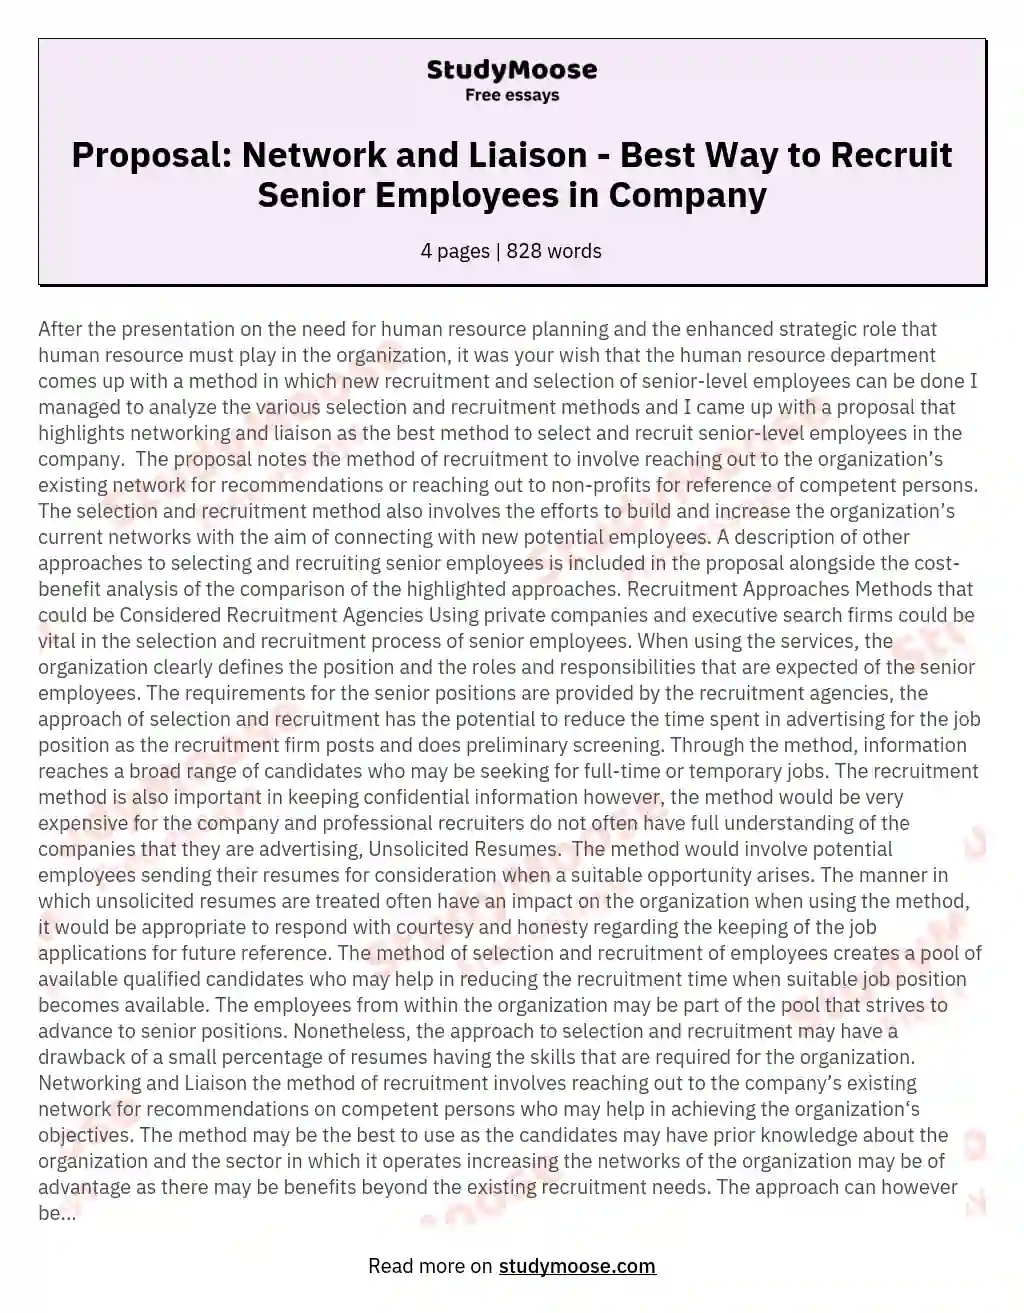 Proposal: Network and Liaison - Best Way to Recruit Senior Employees in Company essay